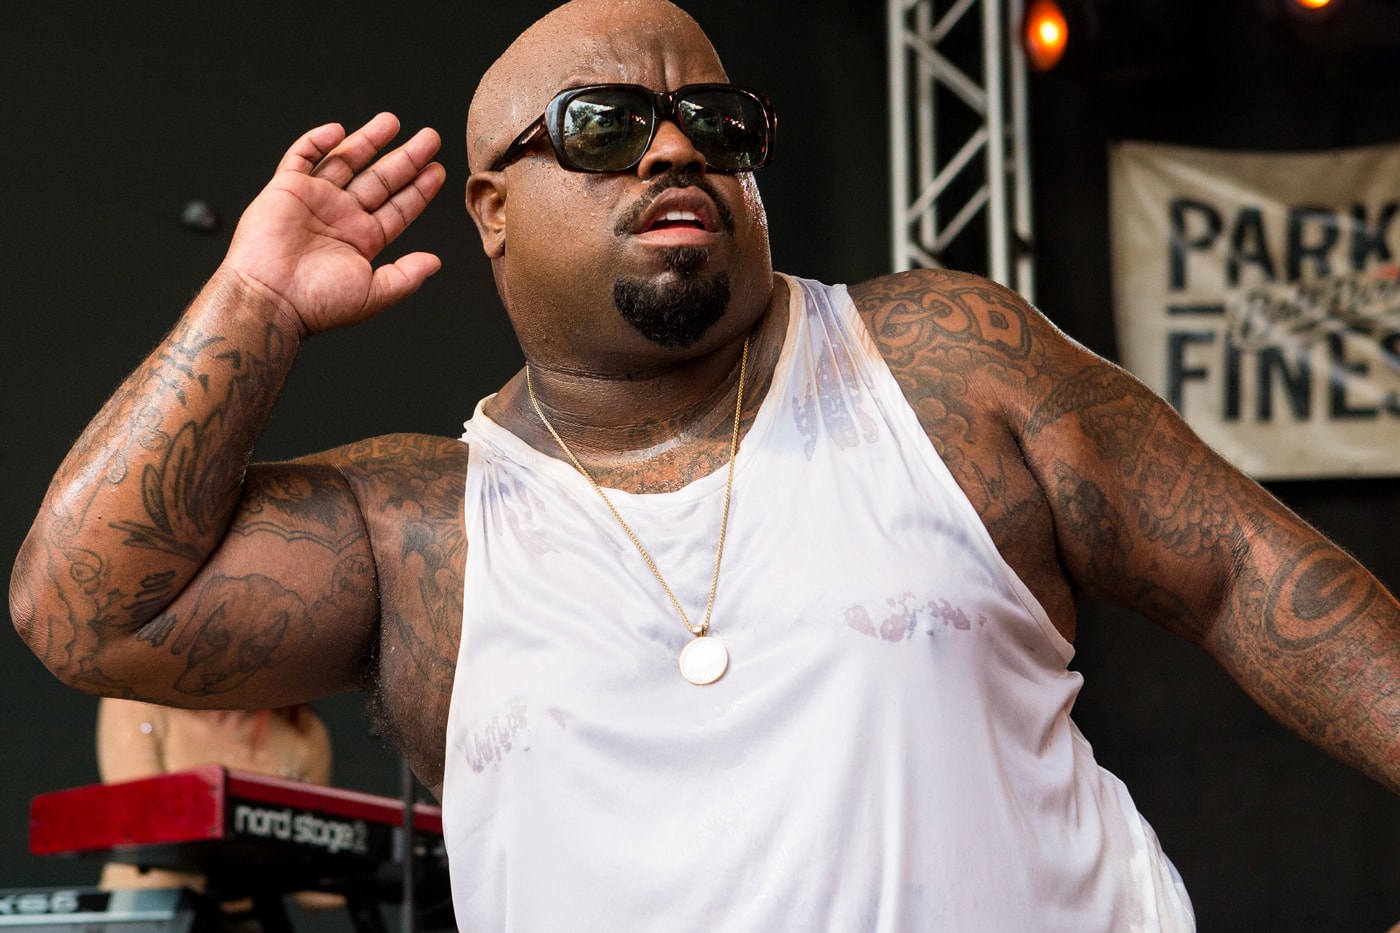 Cee-Lo Green featuring 50 Cent - F**K YOU (Freestyle)